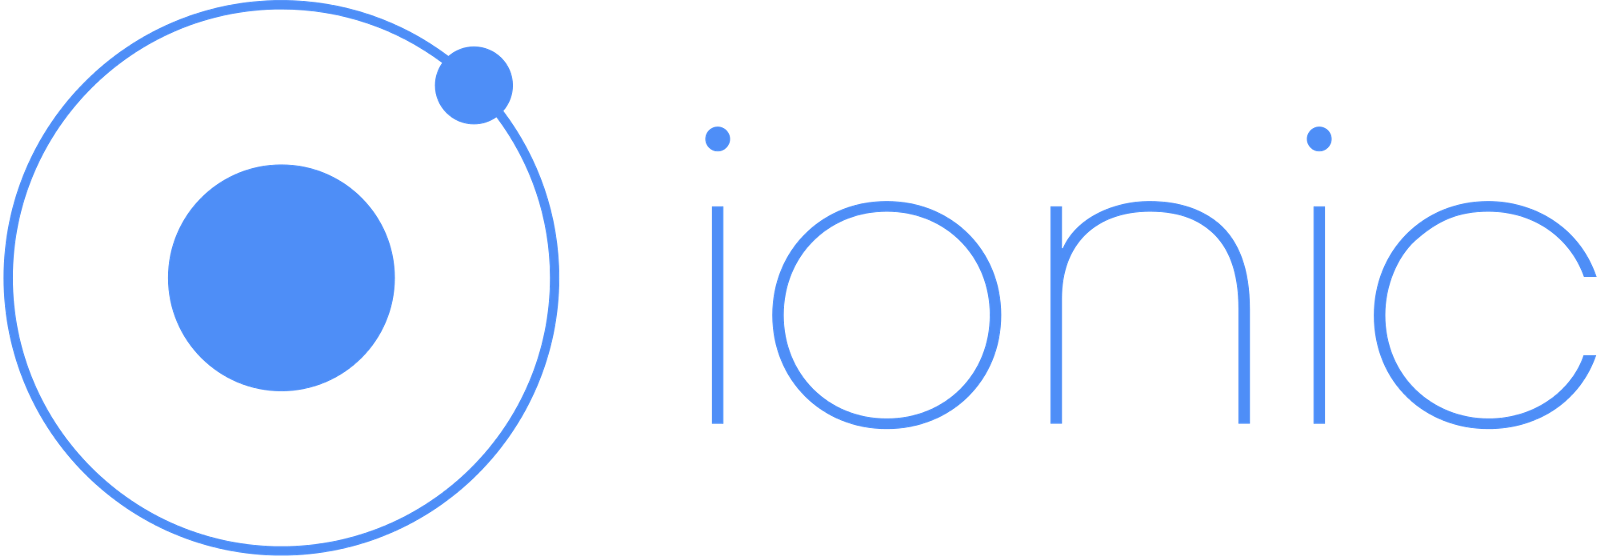 Just As A Precondition I Should Say That I'm An Ionic - Ionic 2 Logo Png Clipart (1600x556), Png Download